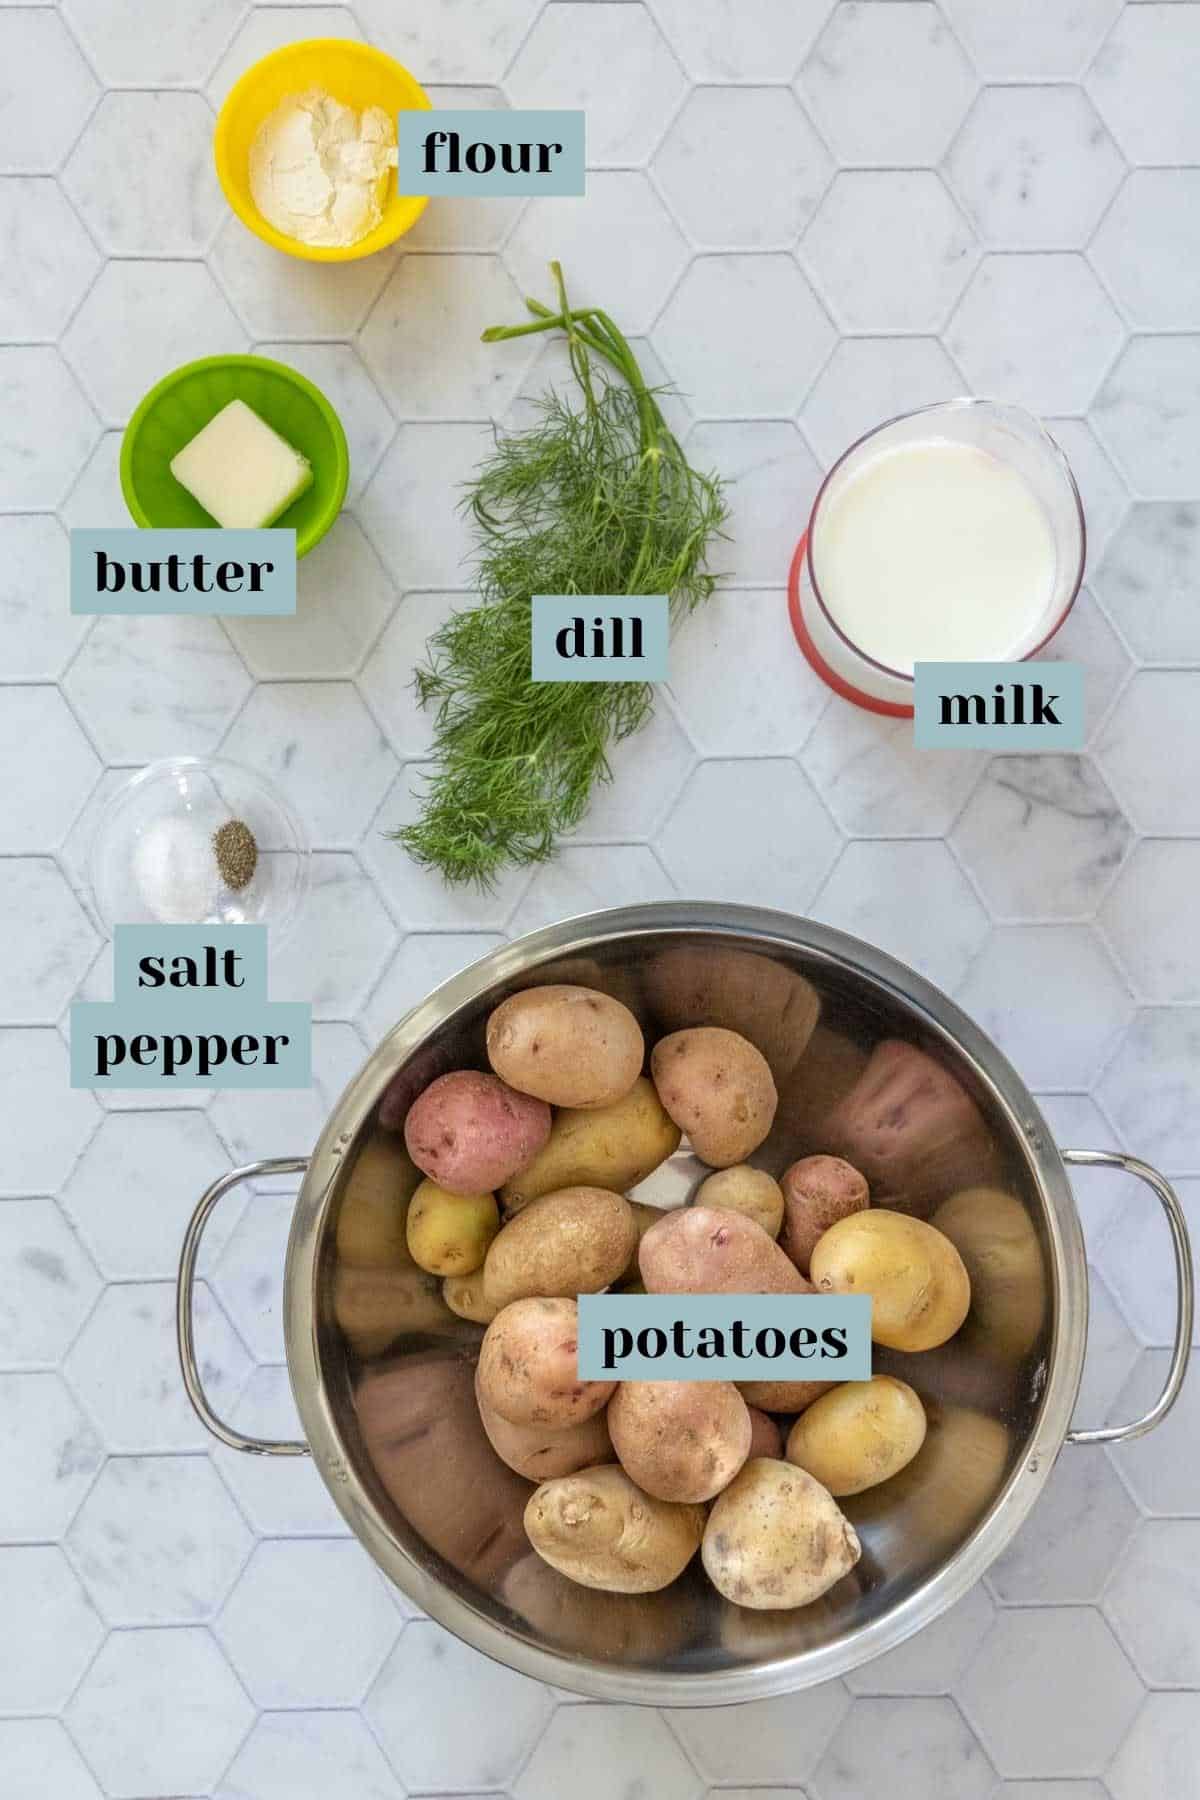 Ingredients for dill potatoes on a tile surface with labels.